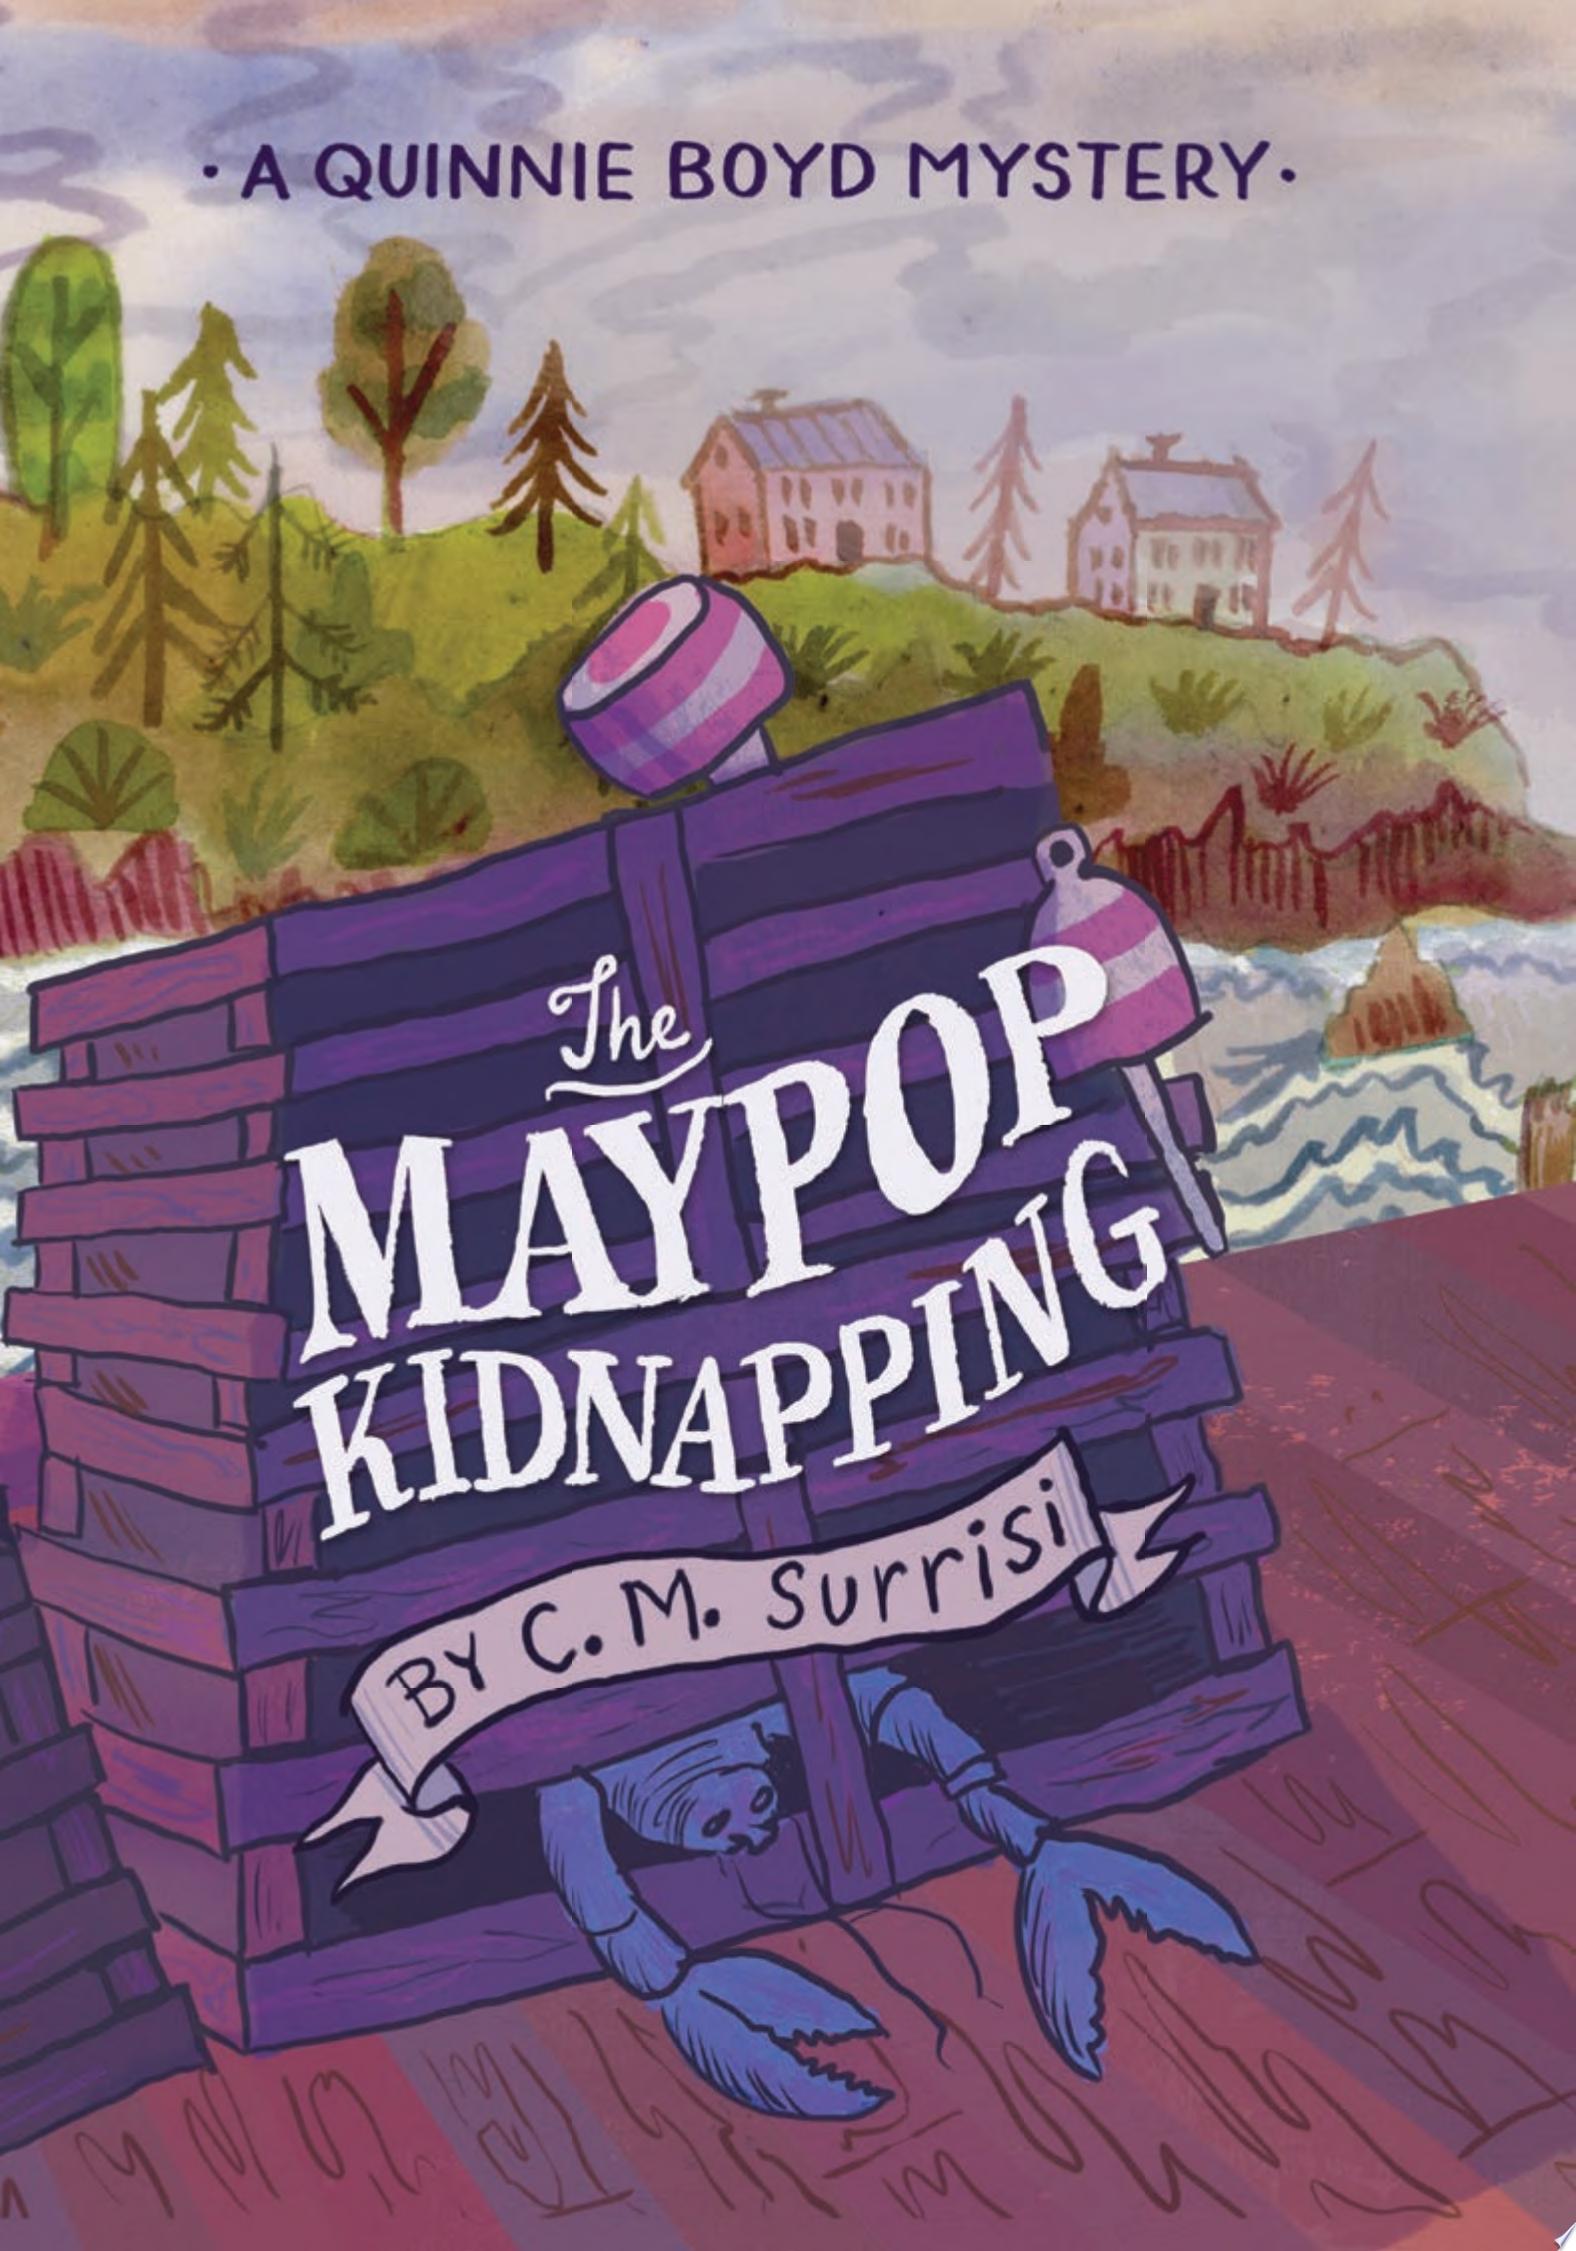 Image for "The Maypop Kidnapping"